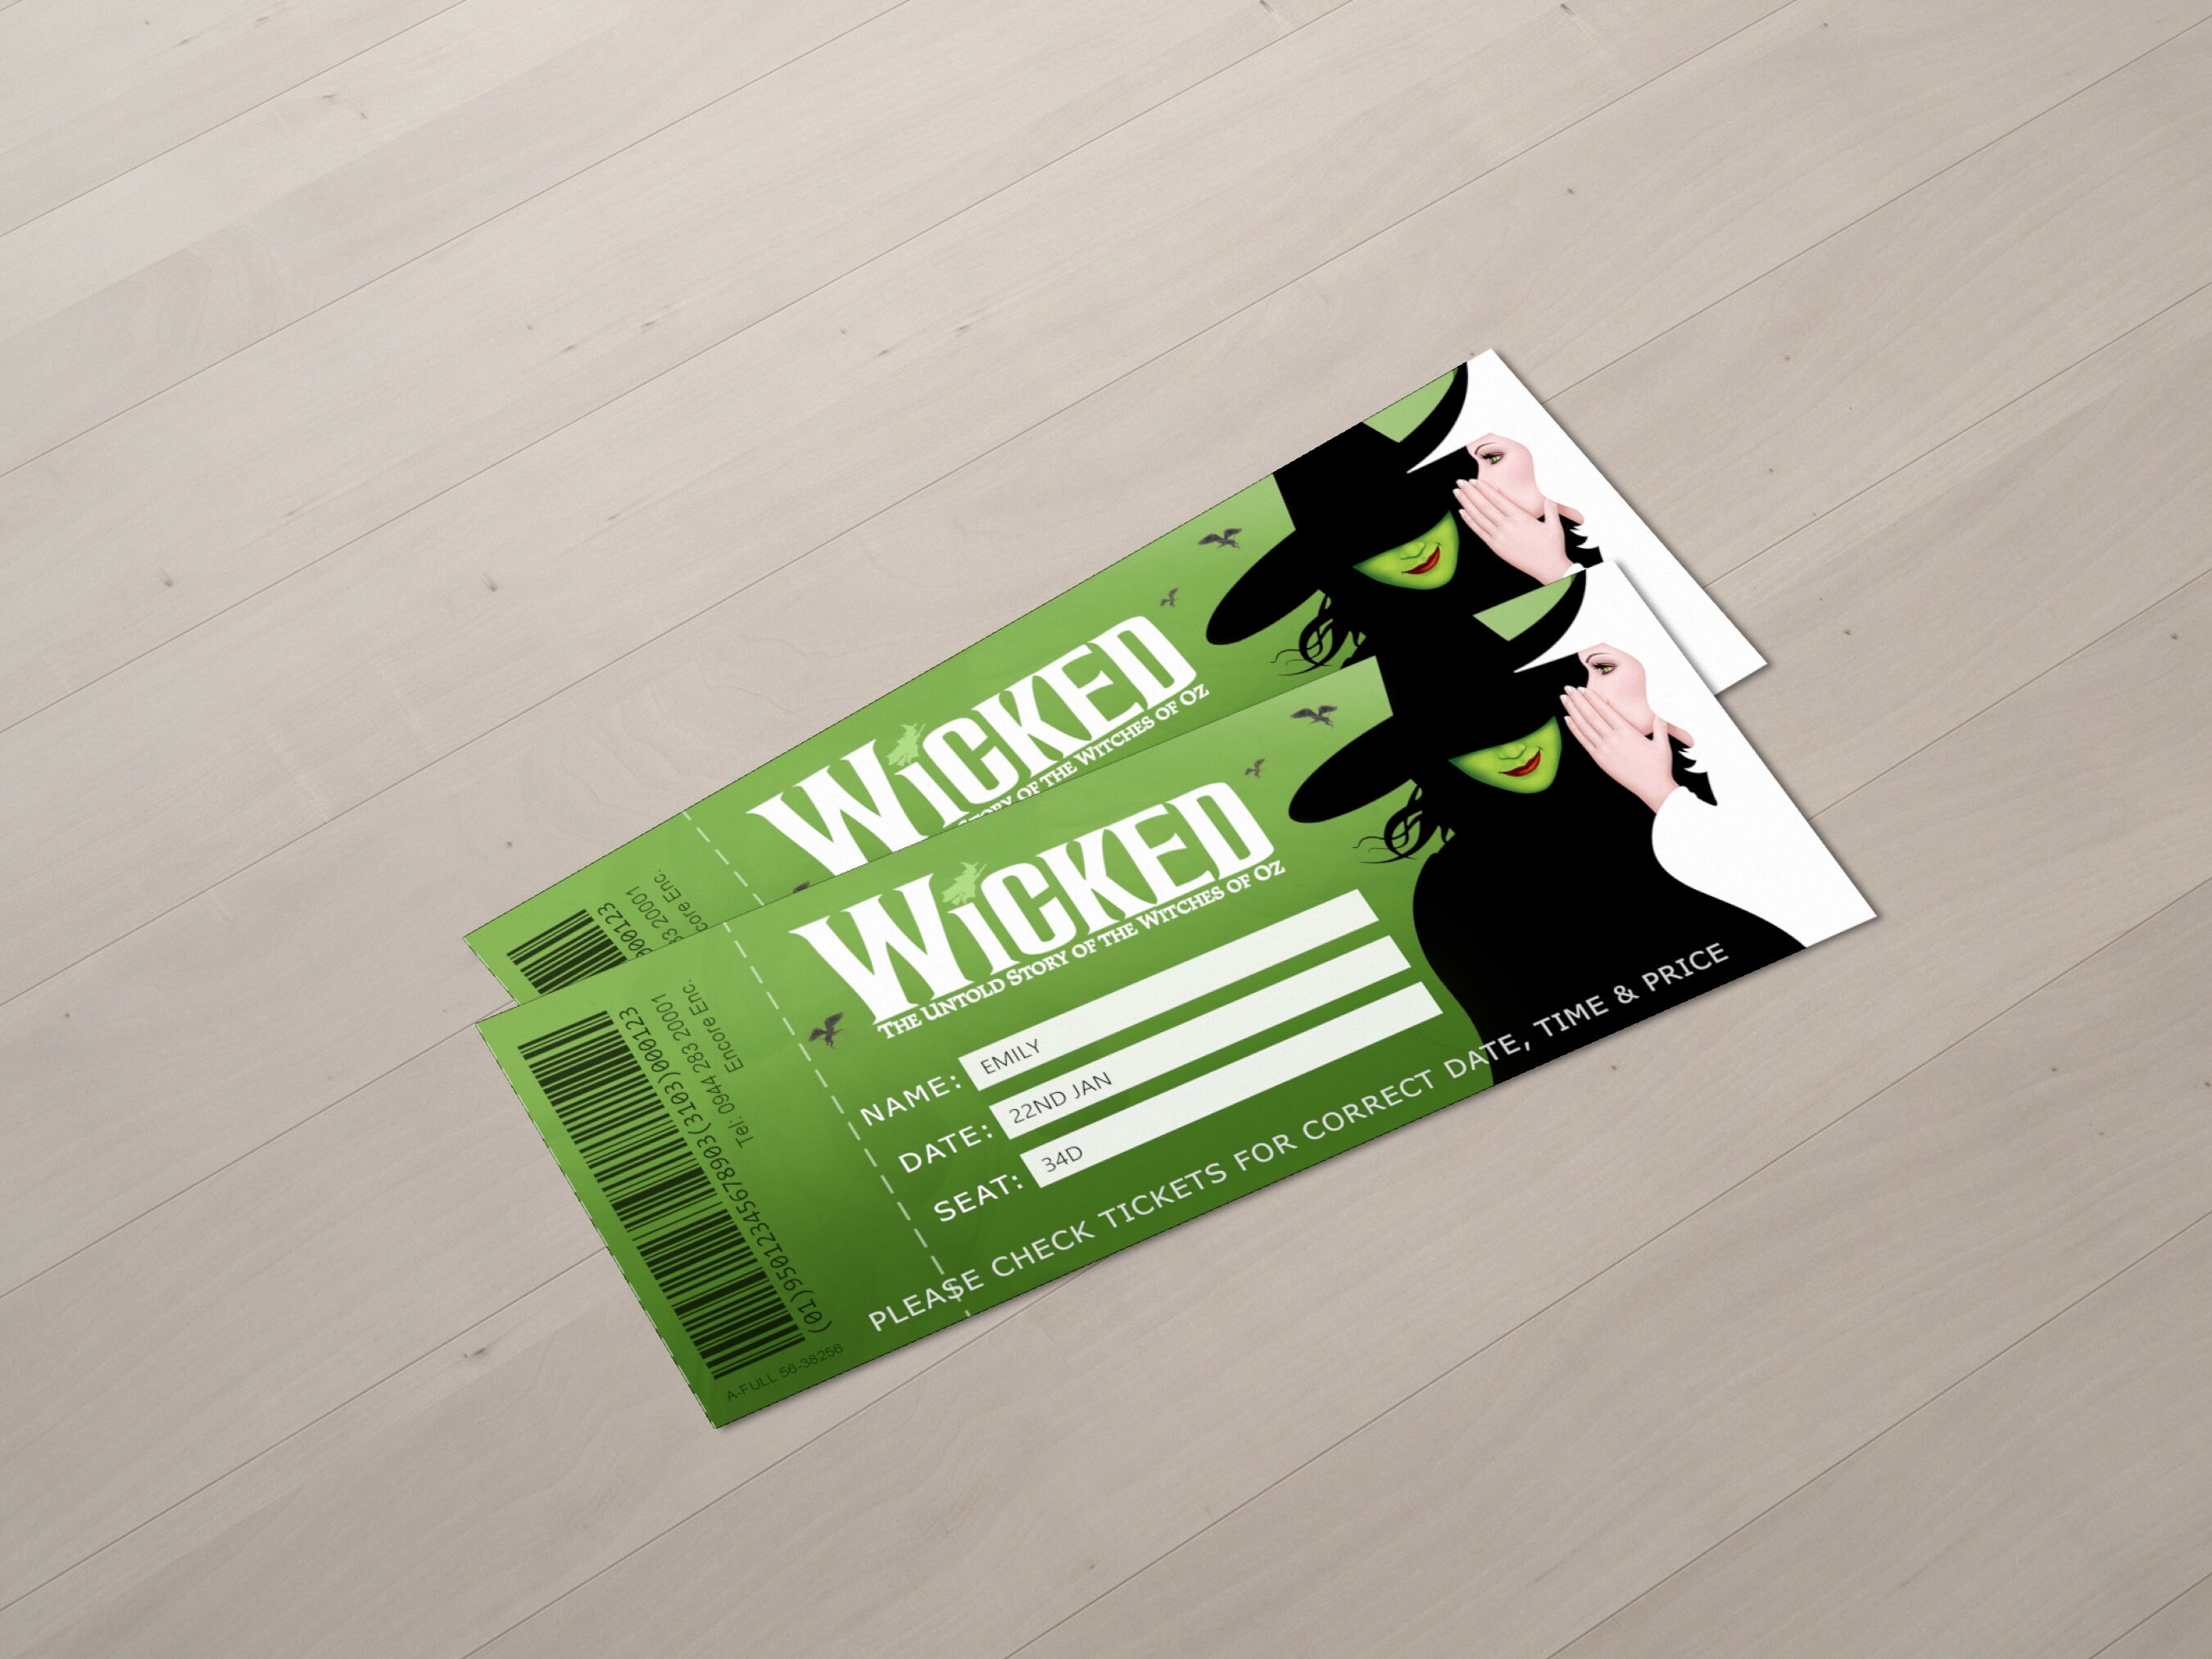 printable-wicked-broadway-show-gift-reveal-kaci-bella-designs-wicked